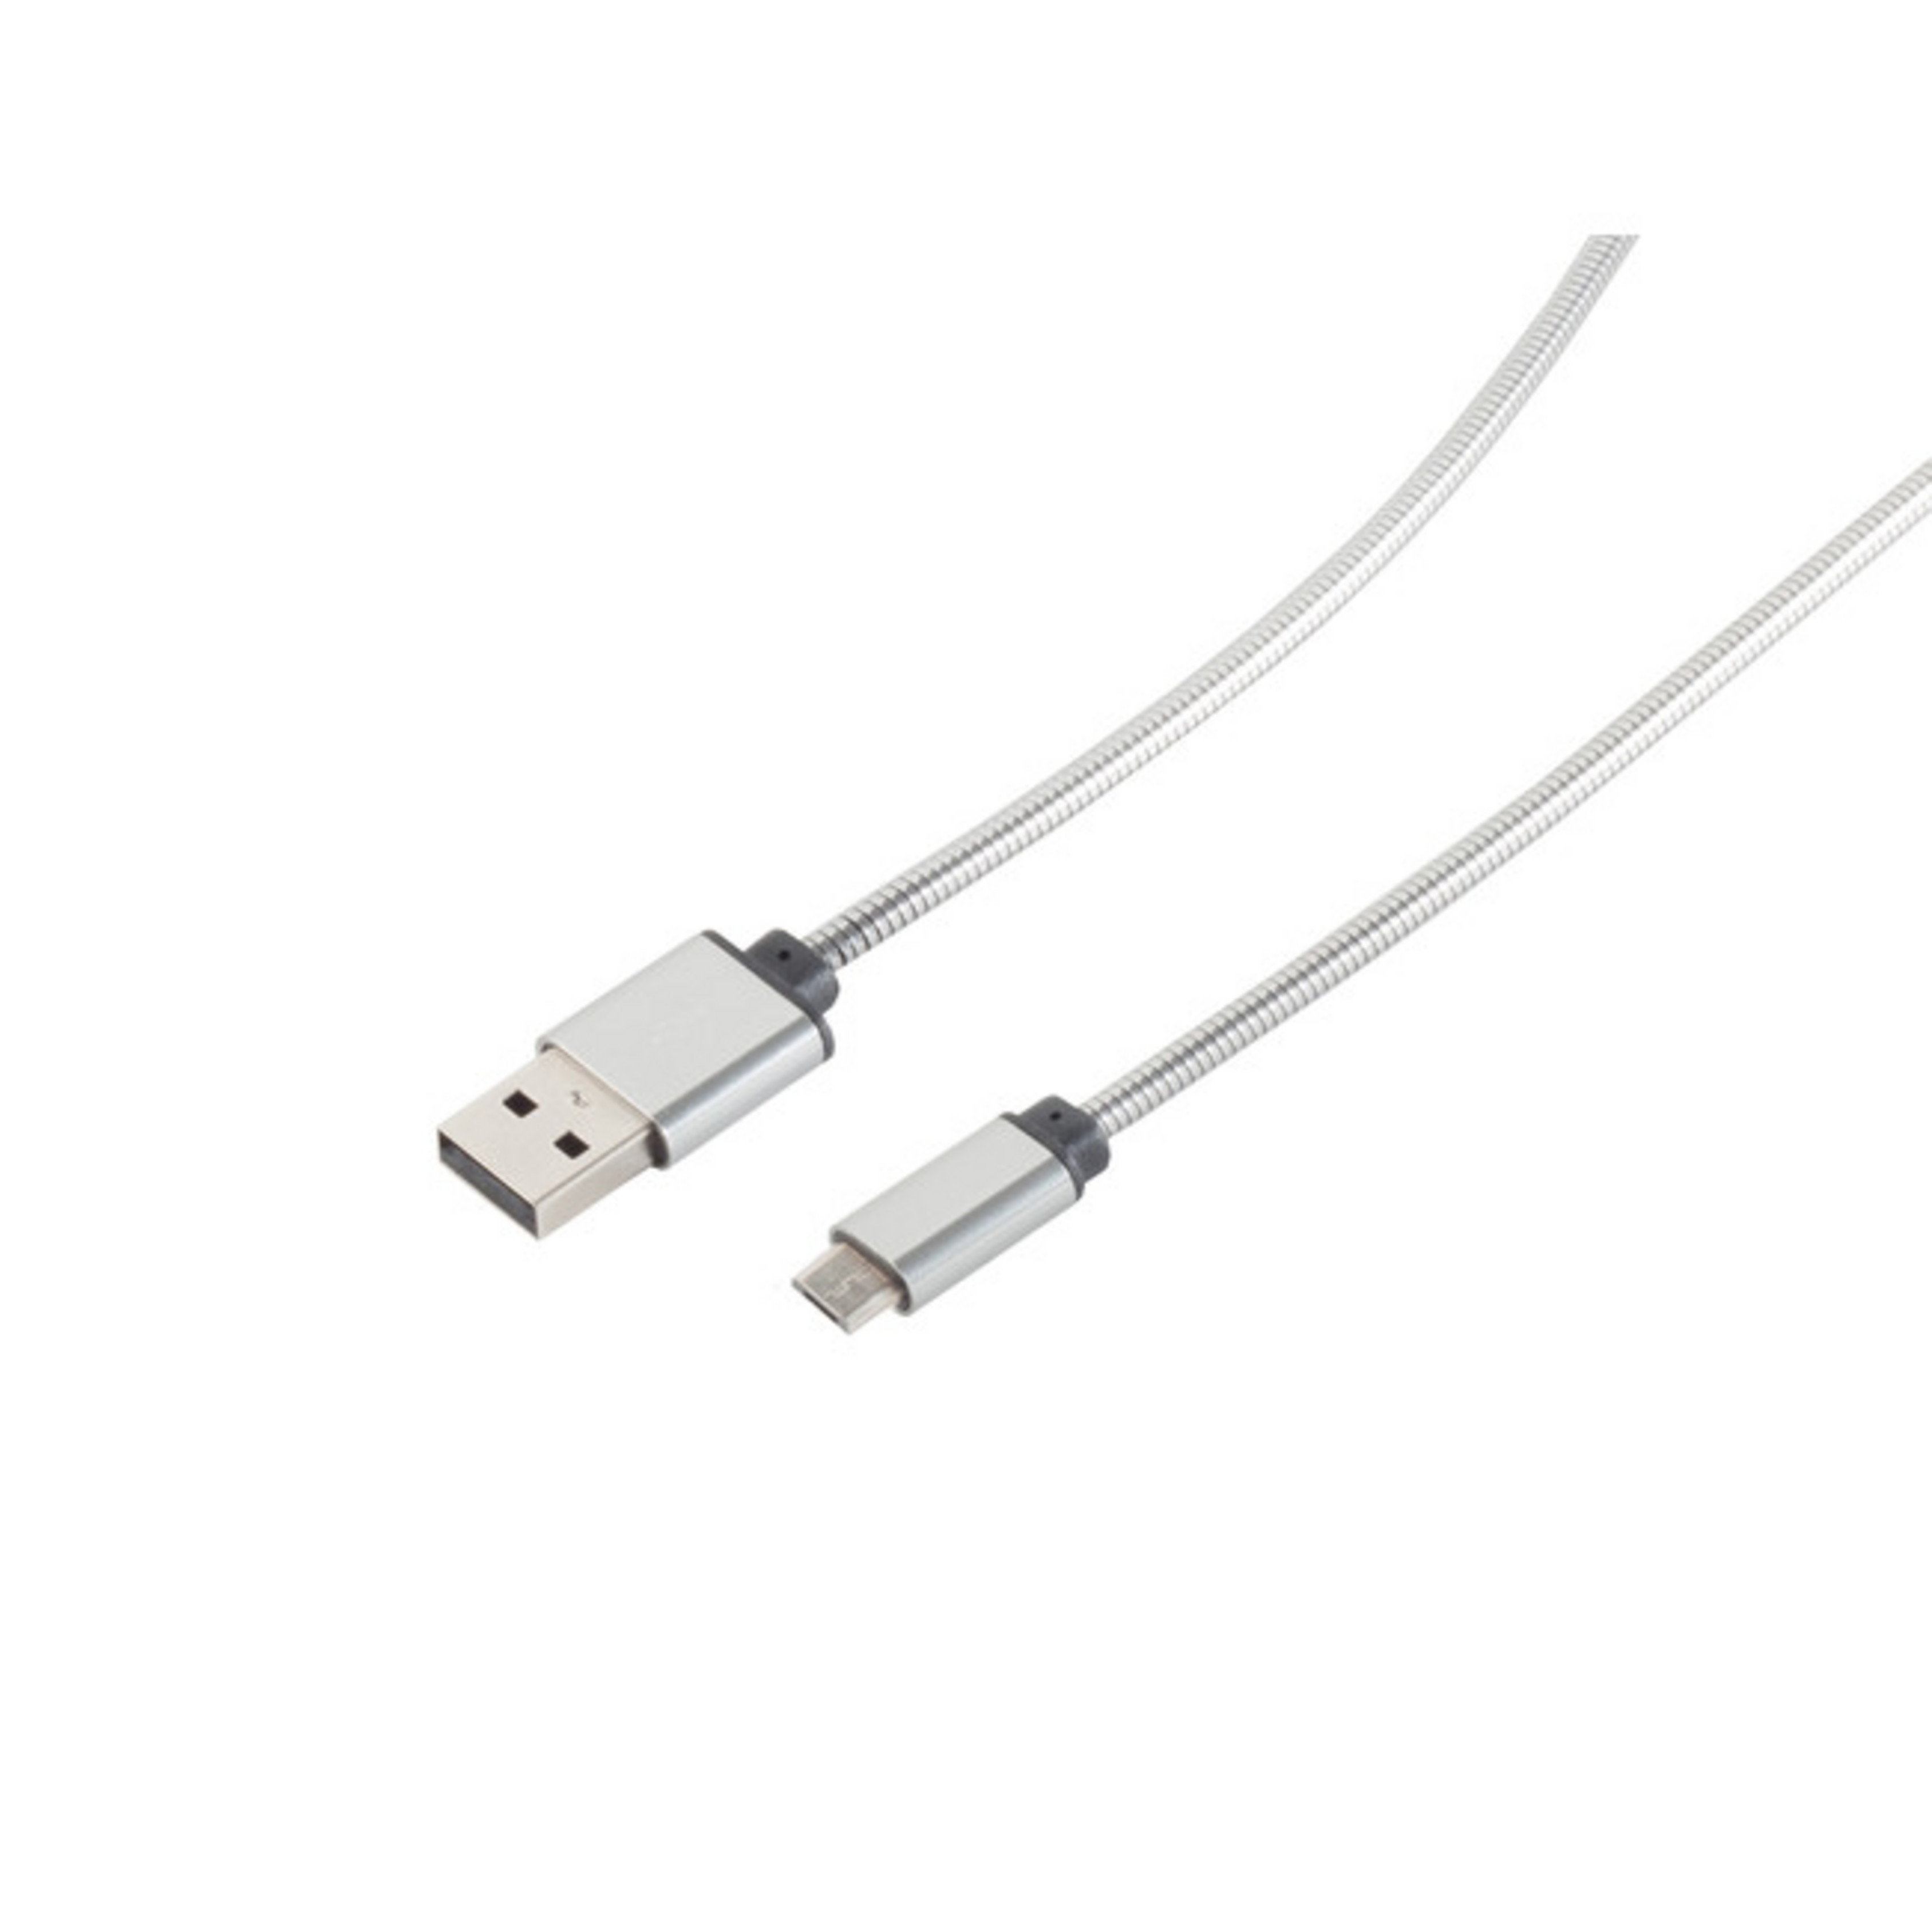 Kabel Kabel 1m USB Lade-Sync micro, MAXIMUM CONNECTIVITY USB A/ S/CONN Silber Steel USB